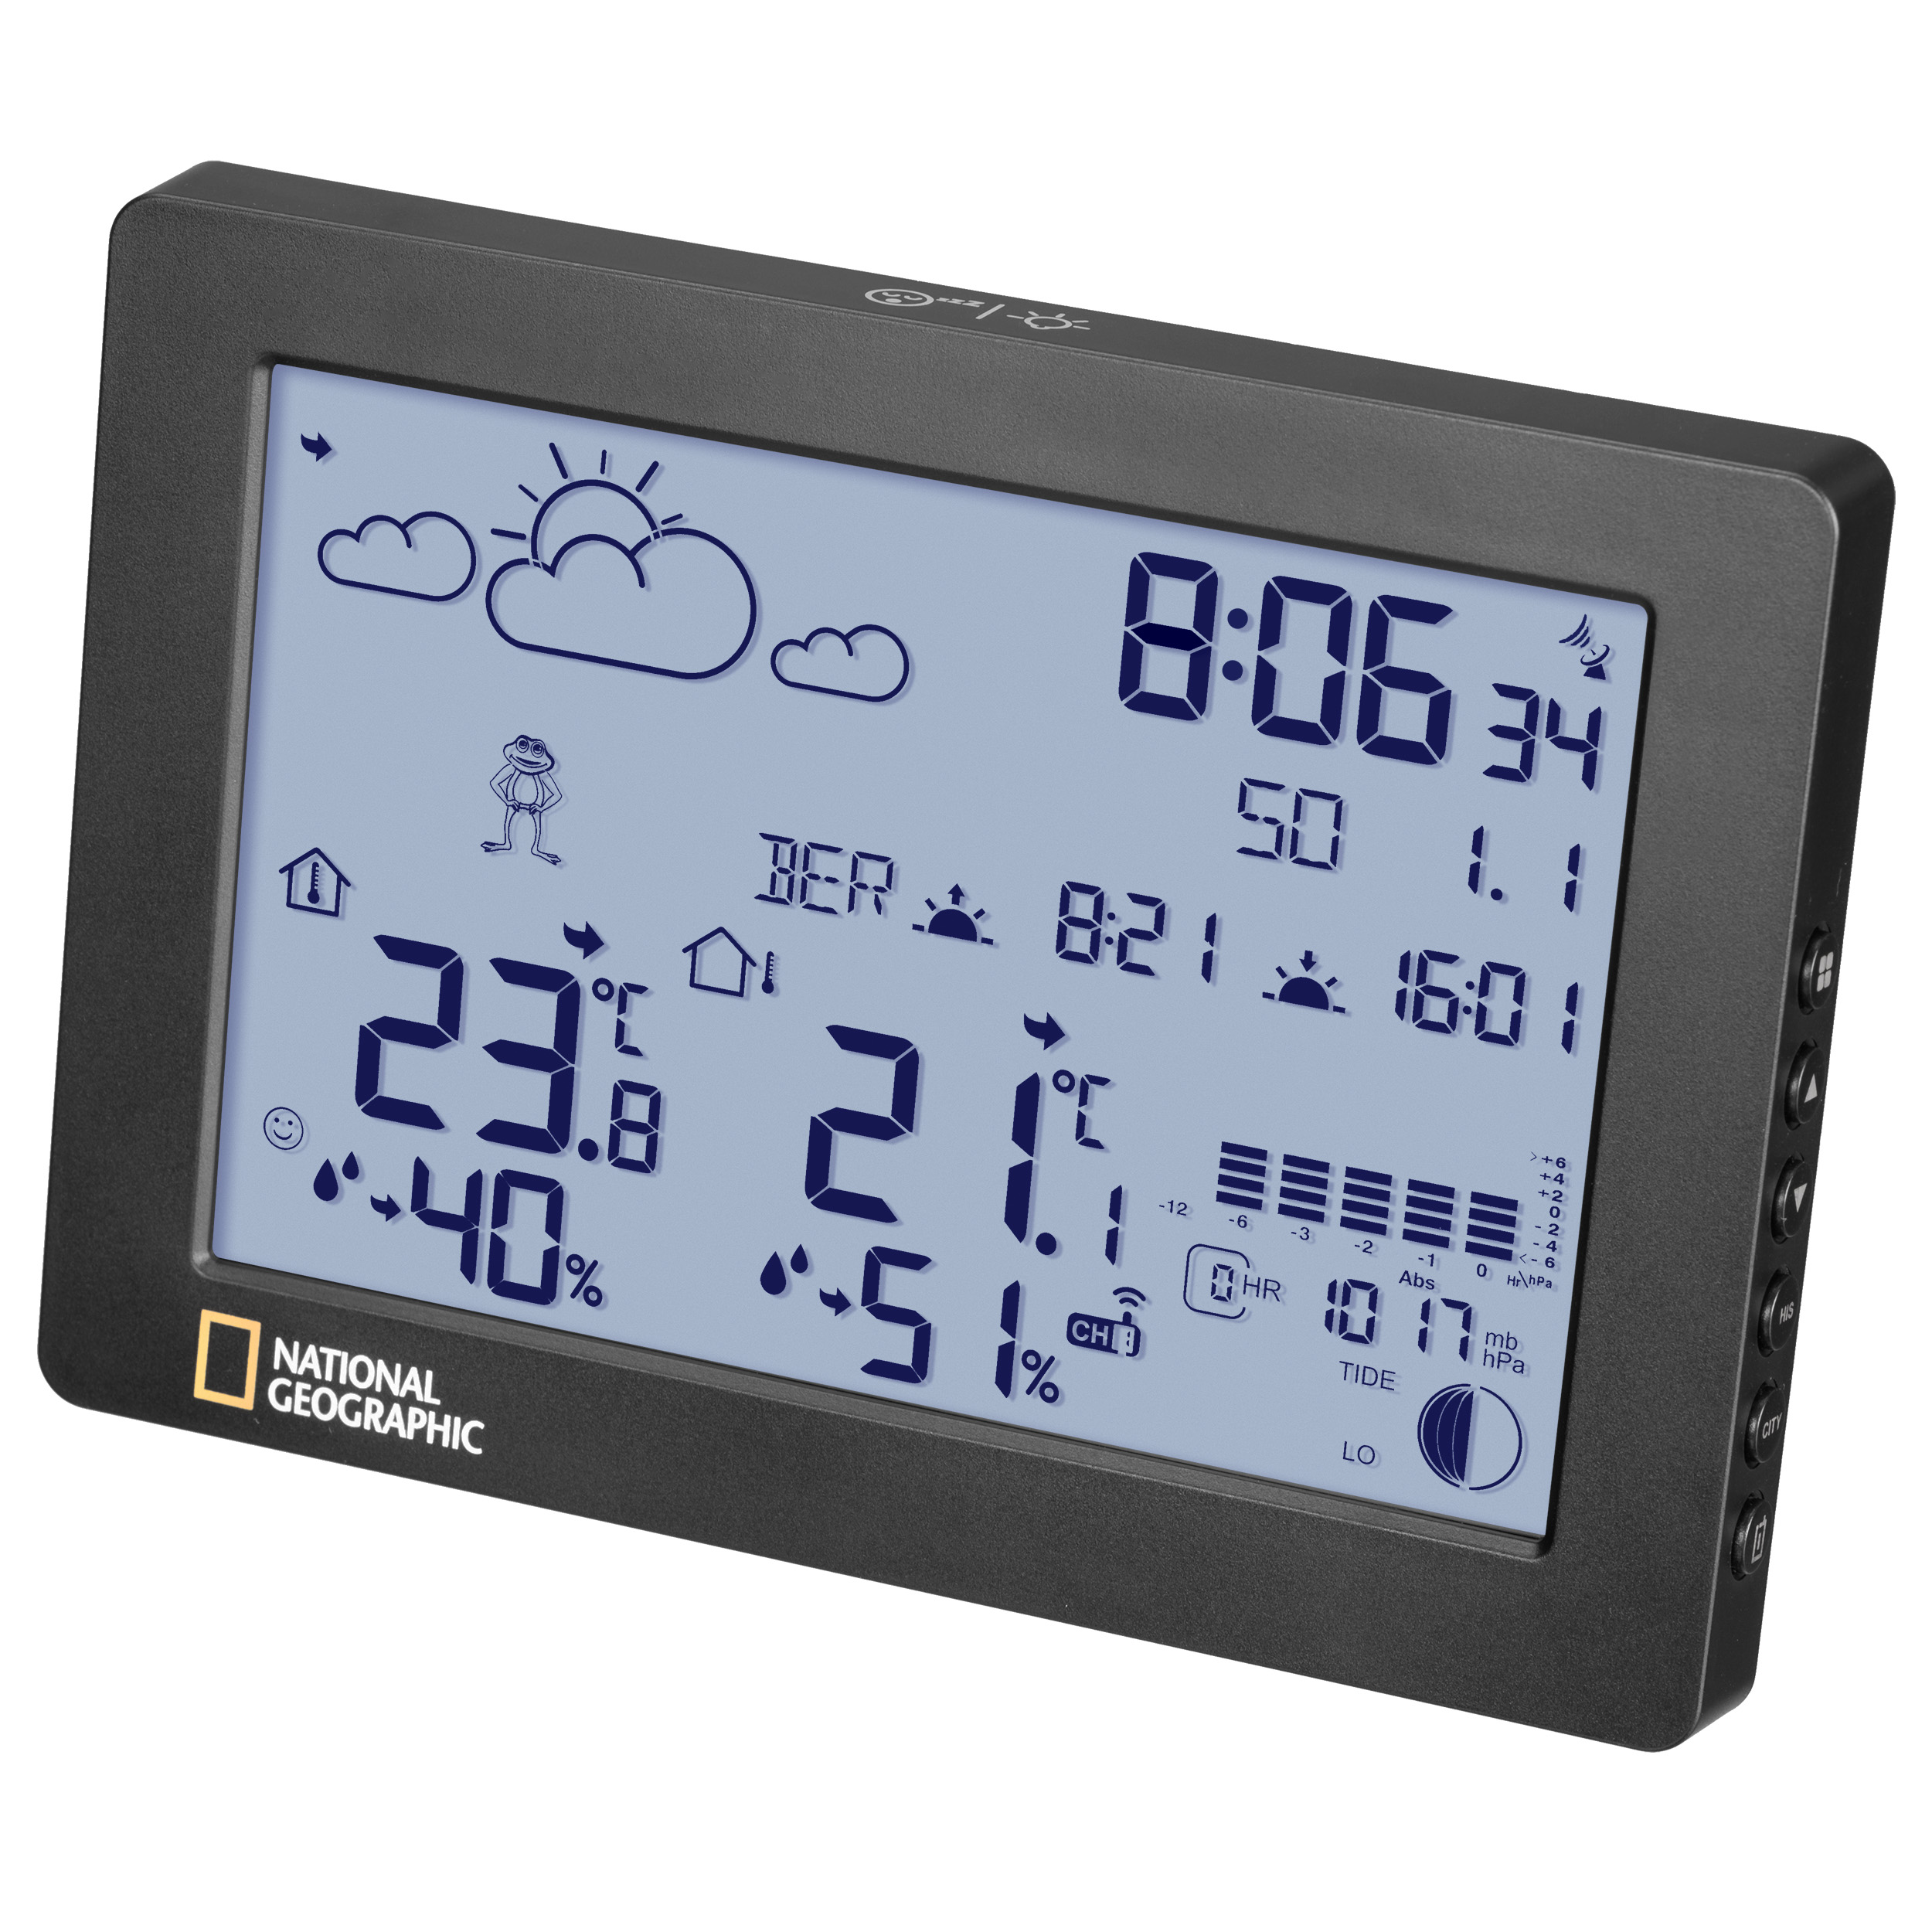 NATIONAL GEOGRAPHIC BaroTemp HZ weather station